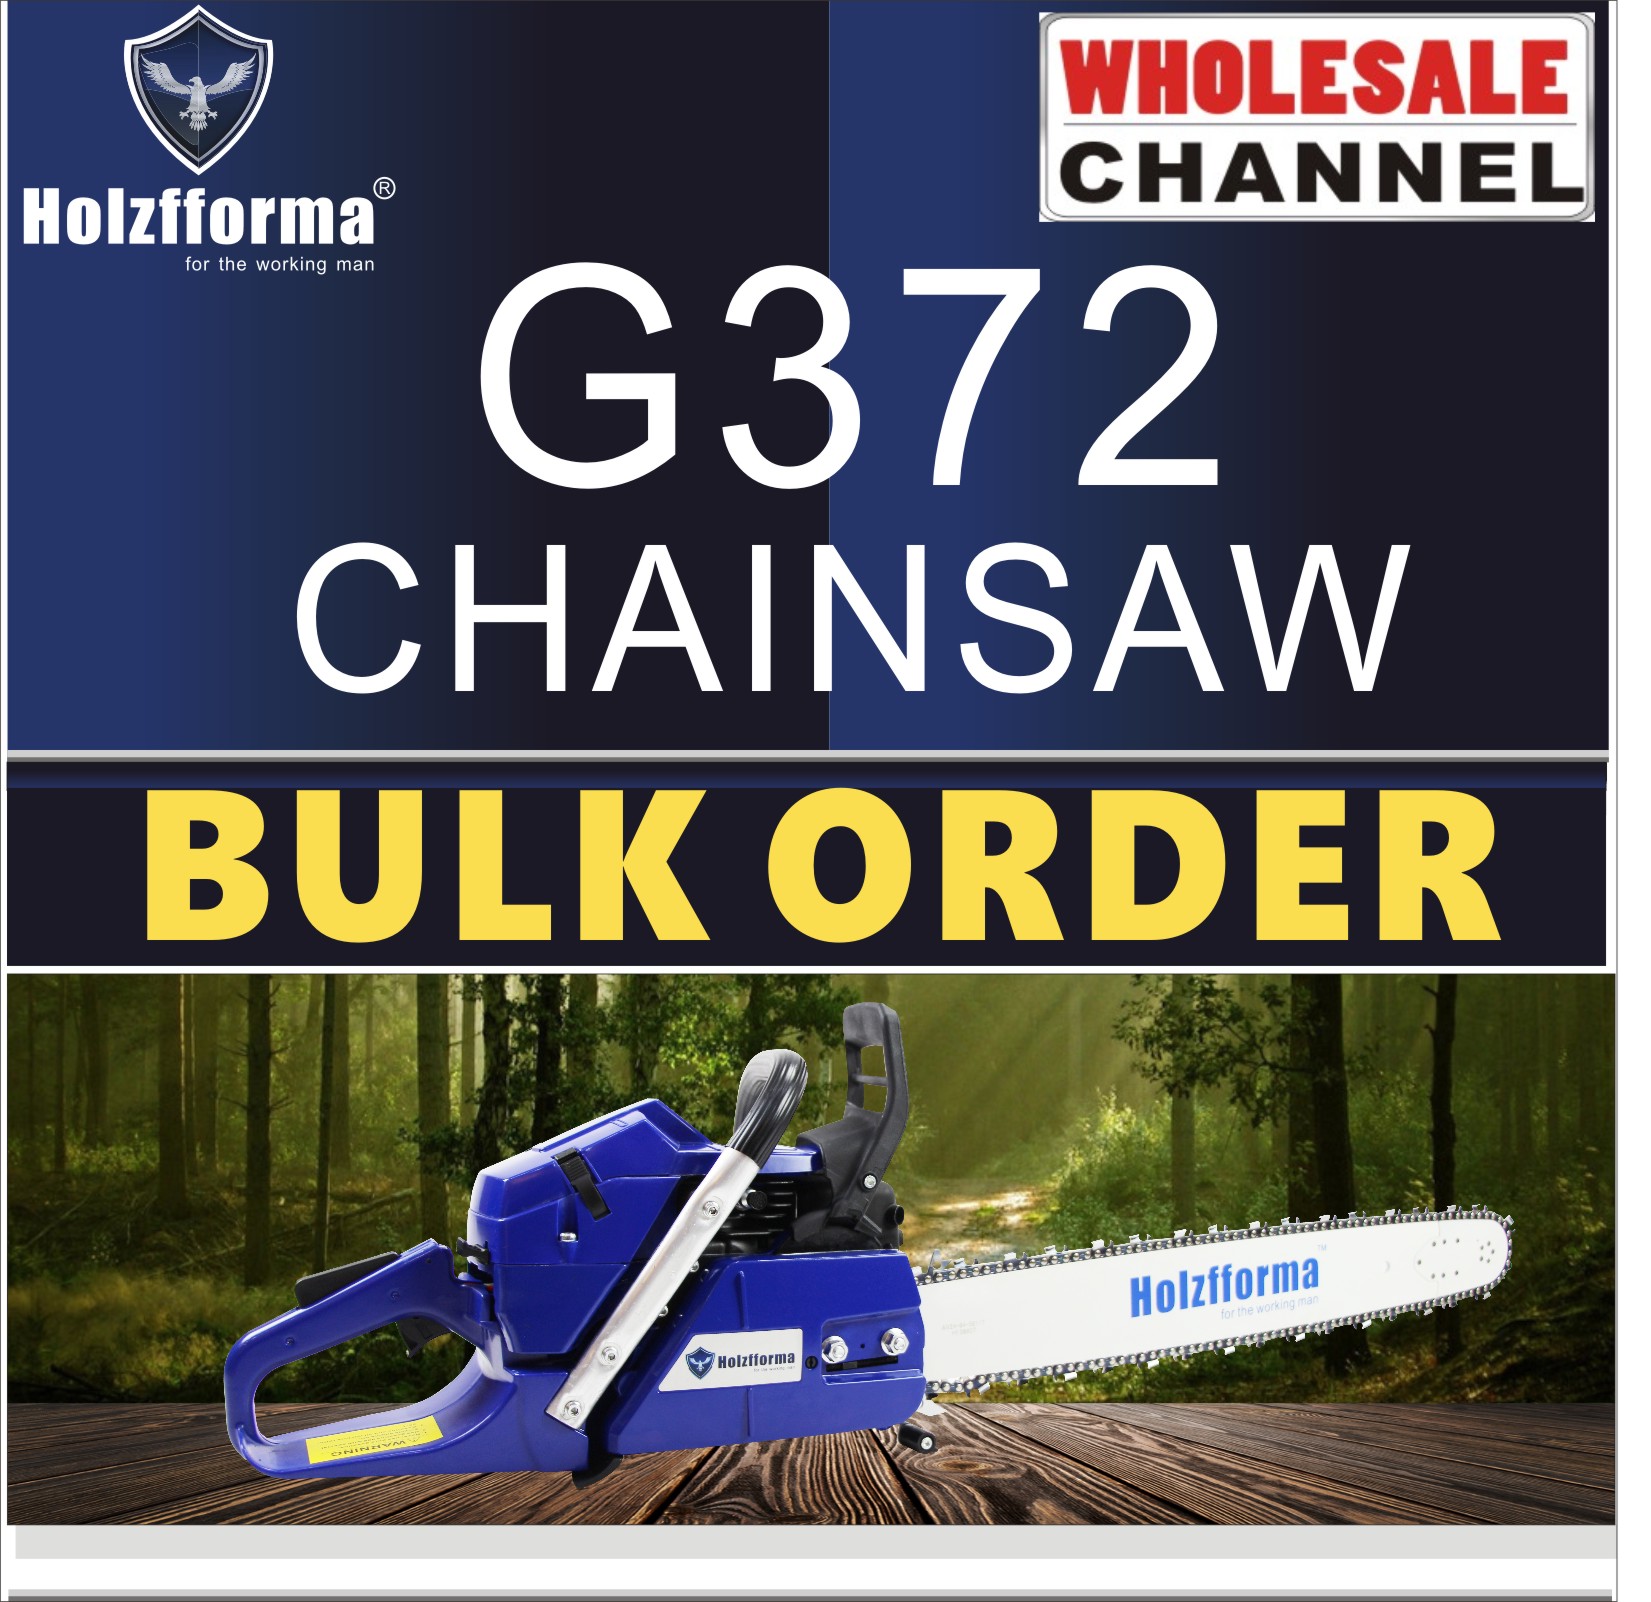 10 SAW BULK ORDER(Minimum Order Quantity 10 units) 65cc Holzfforma® Blue Thunder G372 Gasoline Chain Saws Power Head Without Guide Bar and Chain Top Quality All parts are For H362 365 372 Chainsaw